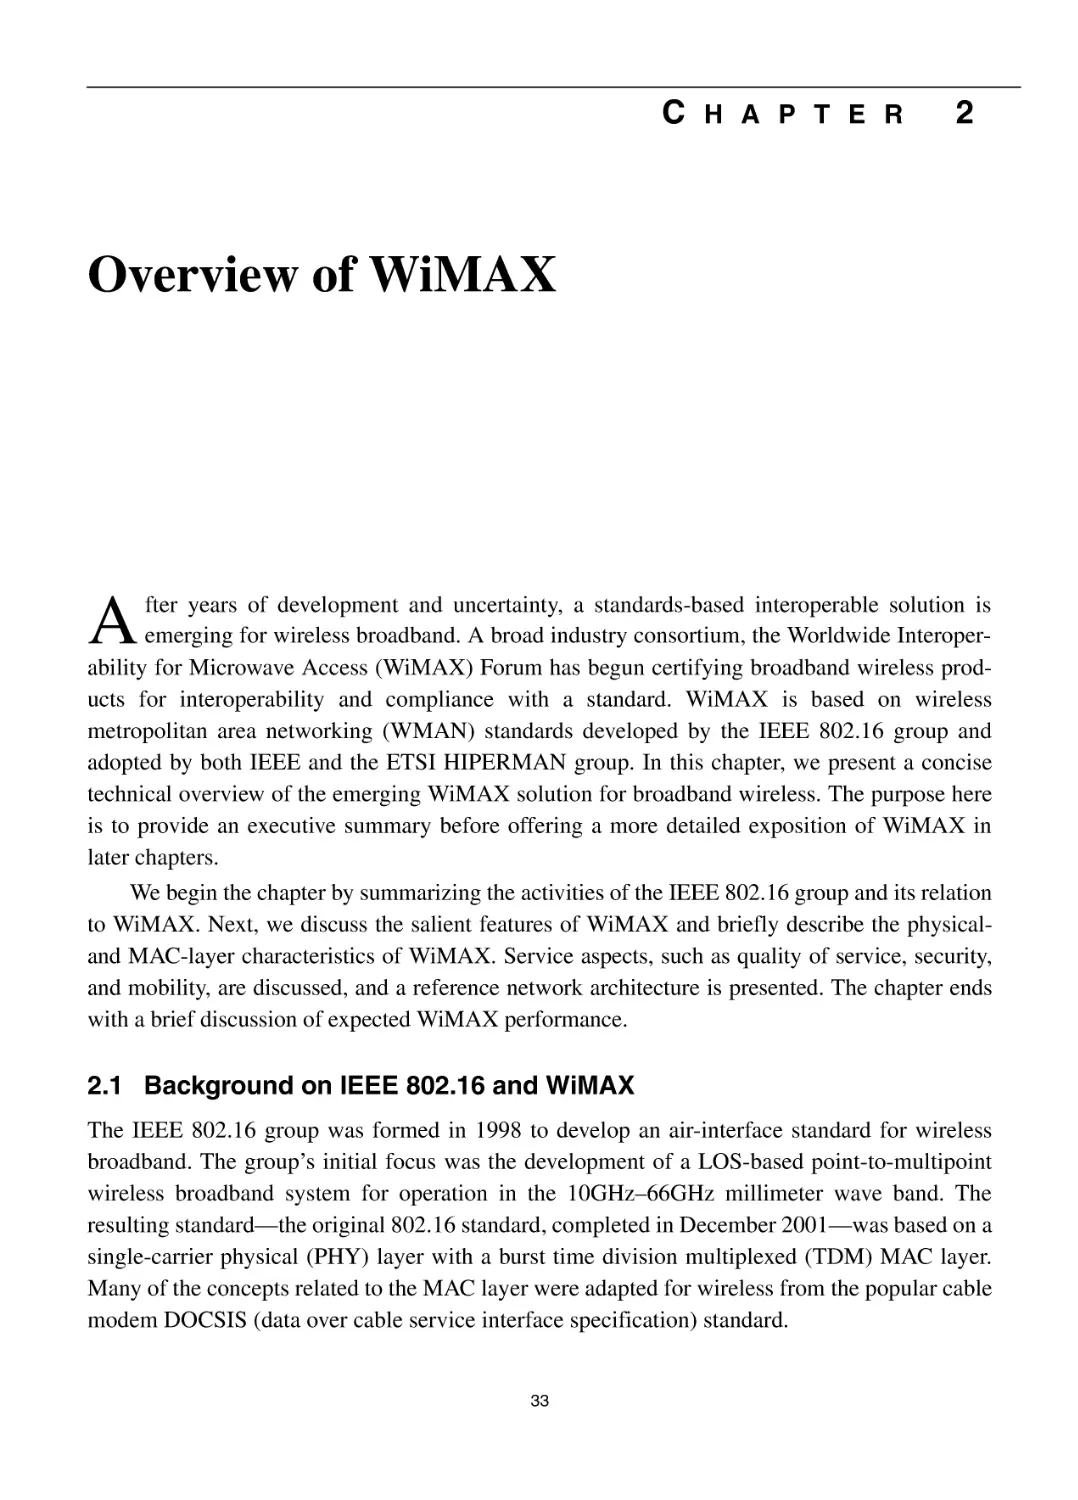 2 Overview of WiMAX
2.1 Background on IEEE 802.16 and WiMAX